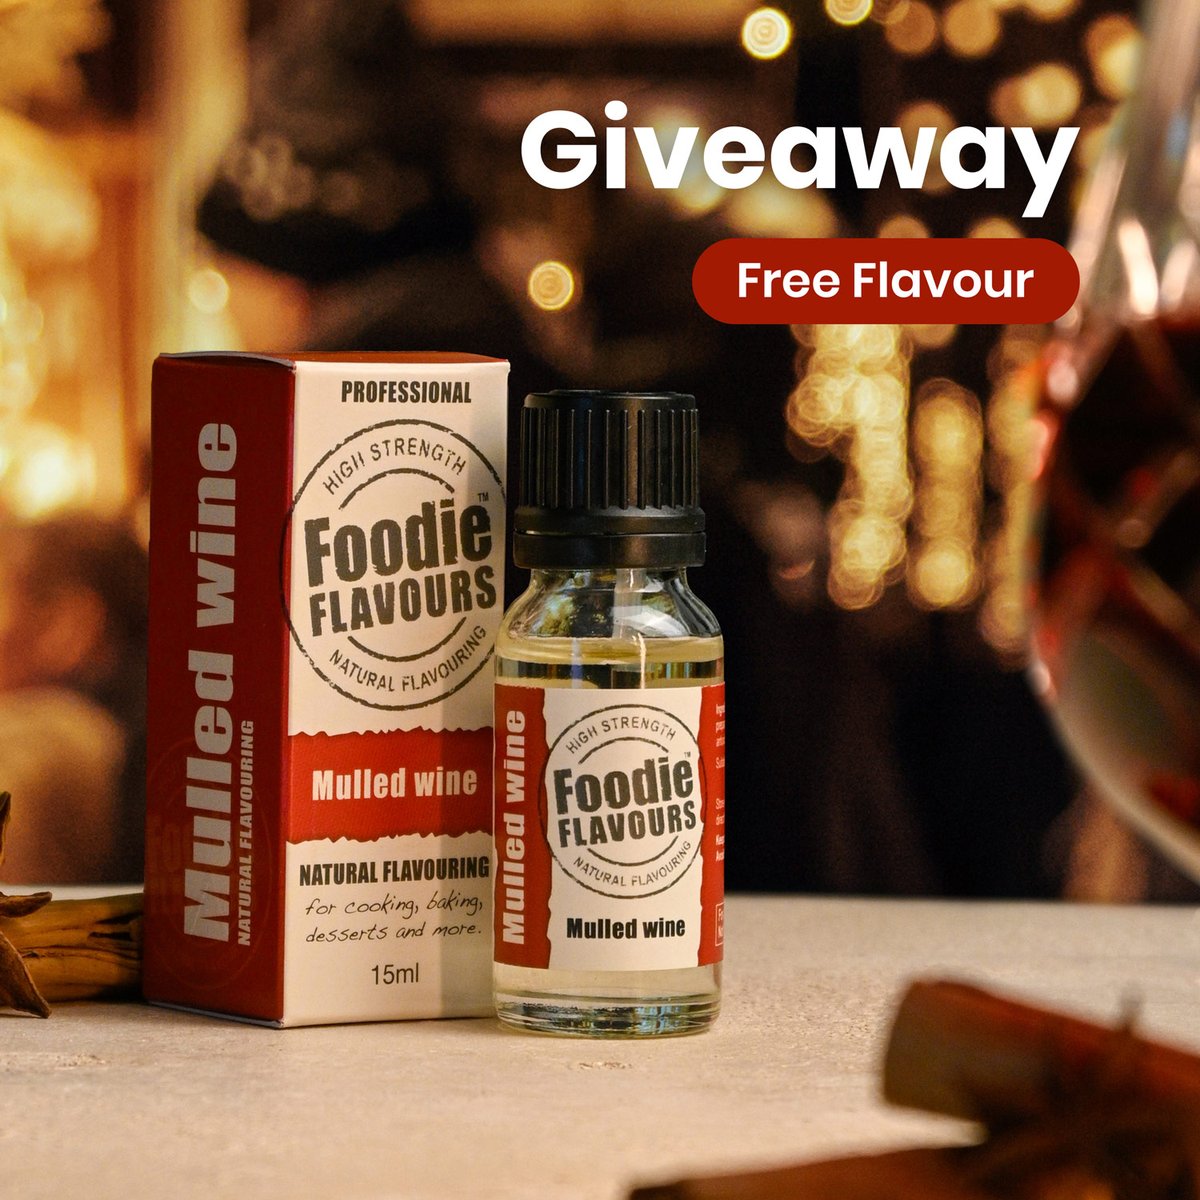 🎉 Giveaway Alert! 🎉
For a limited time, get a free 15ml Mulled Wine Natural Flavouring with all orders over £10! 🍰 The perfect flavour for those colder months, with this delicious warm spice blend.
🛍️ foodieflavours.com
Offer auto applied at checkout.

#MulledWine